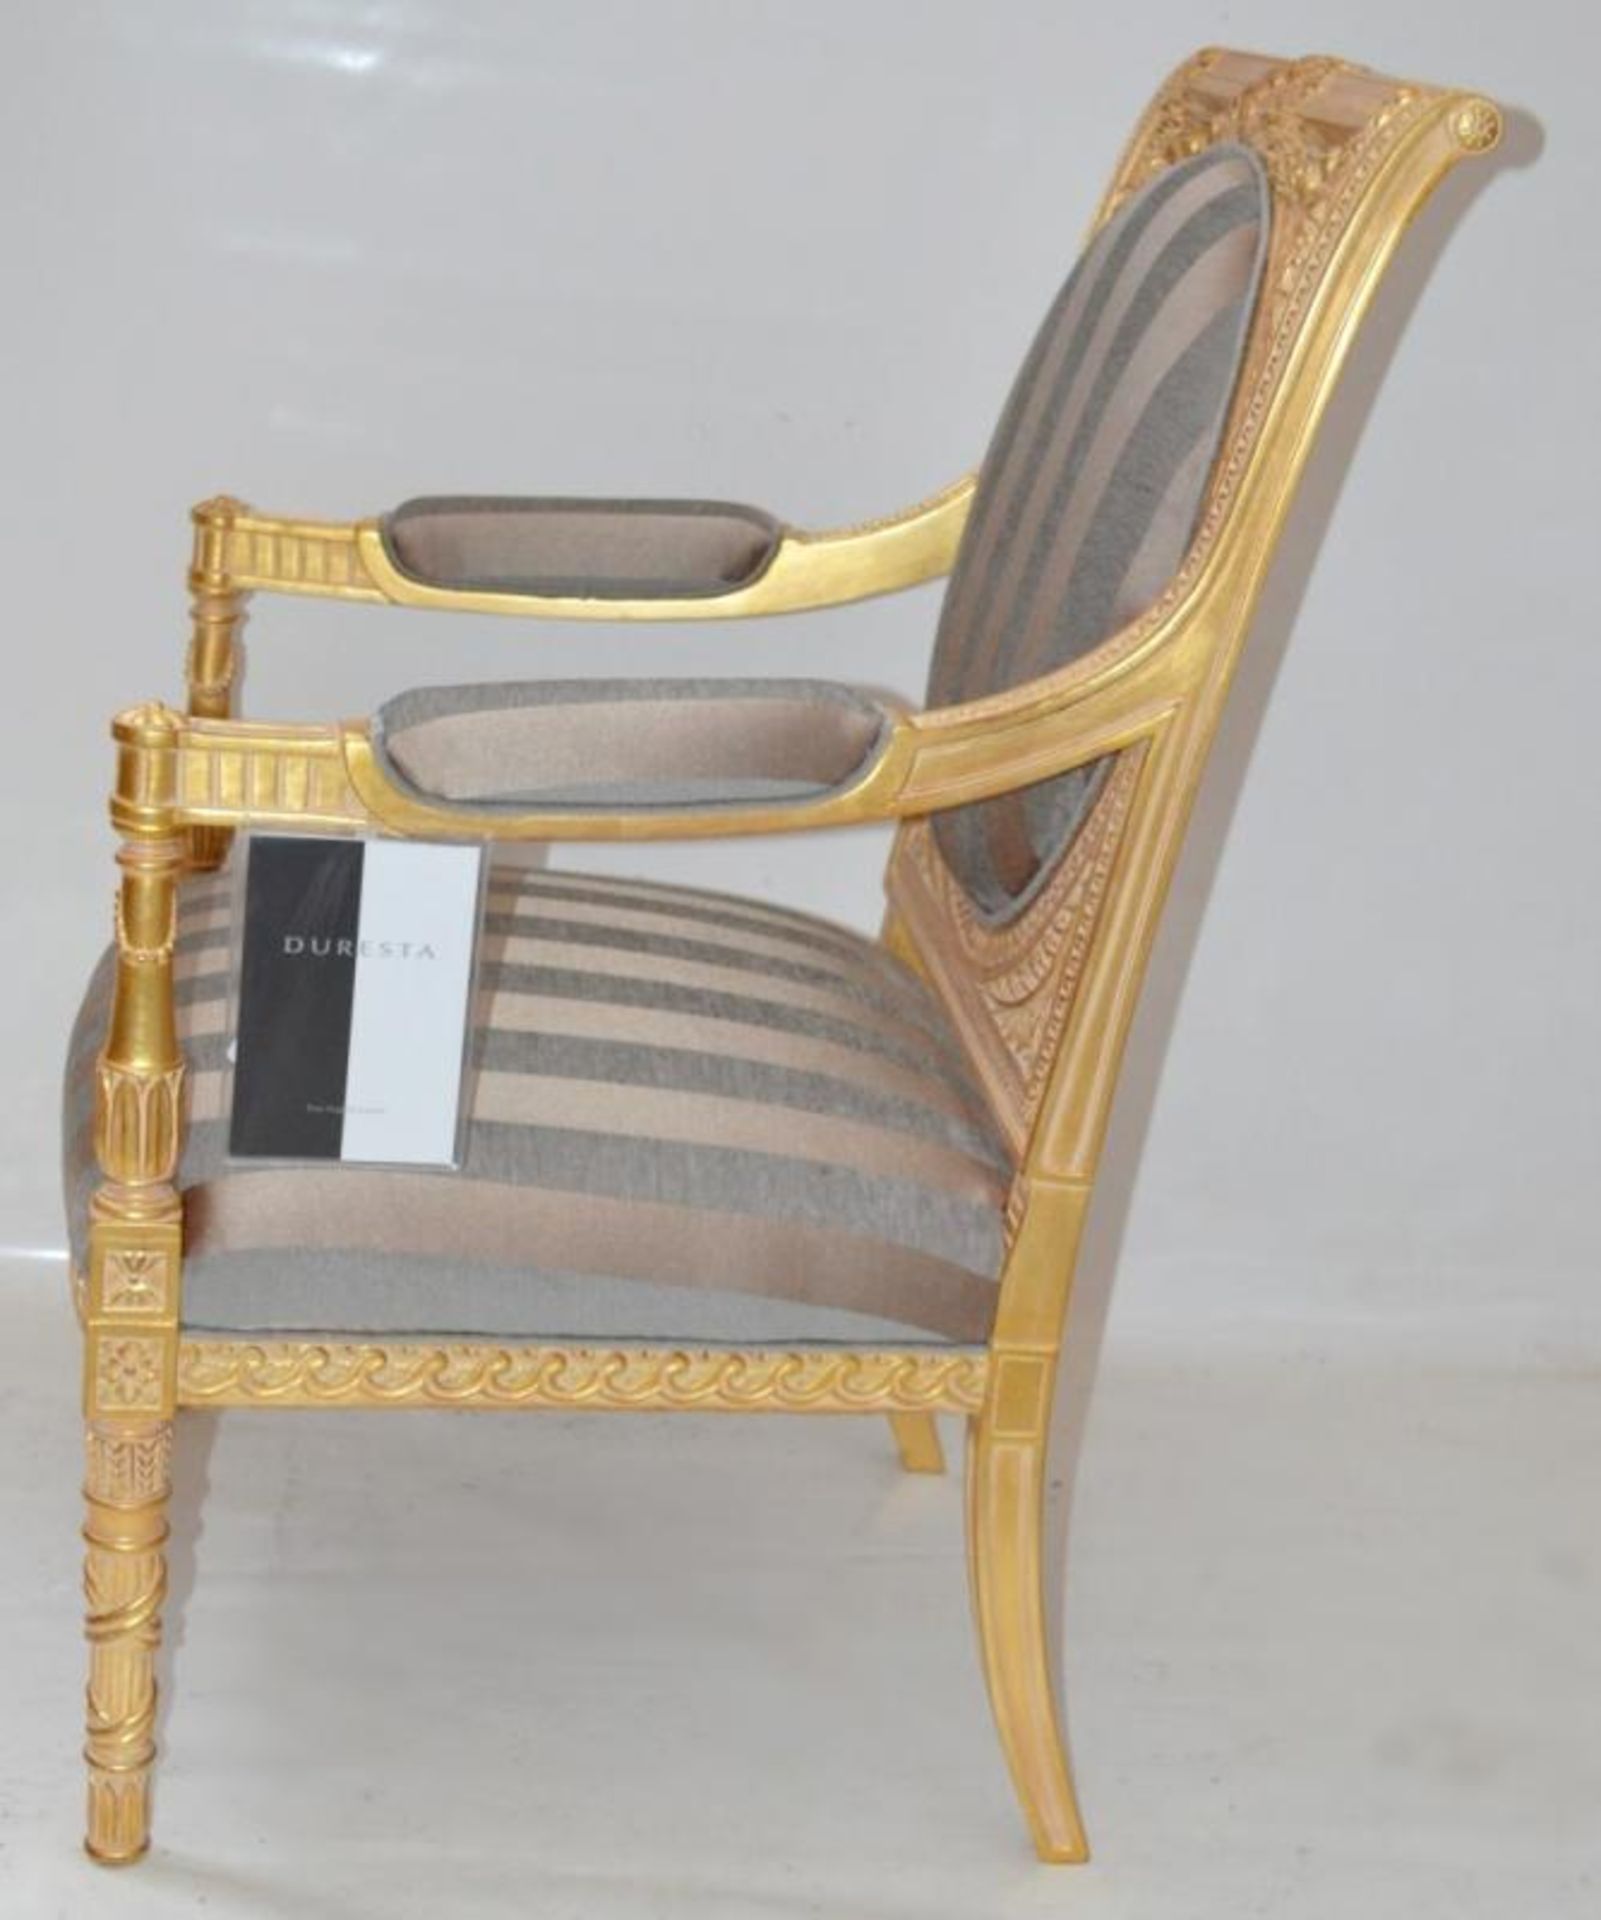 1 x DURESTA Flavia Chair - Features A Hand-Carved Hard Wood Frame With Hand-Stitched Coil Sprung Sea - Bild 9 aus 16